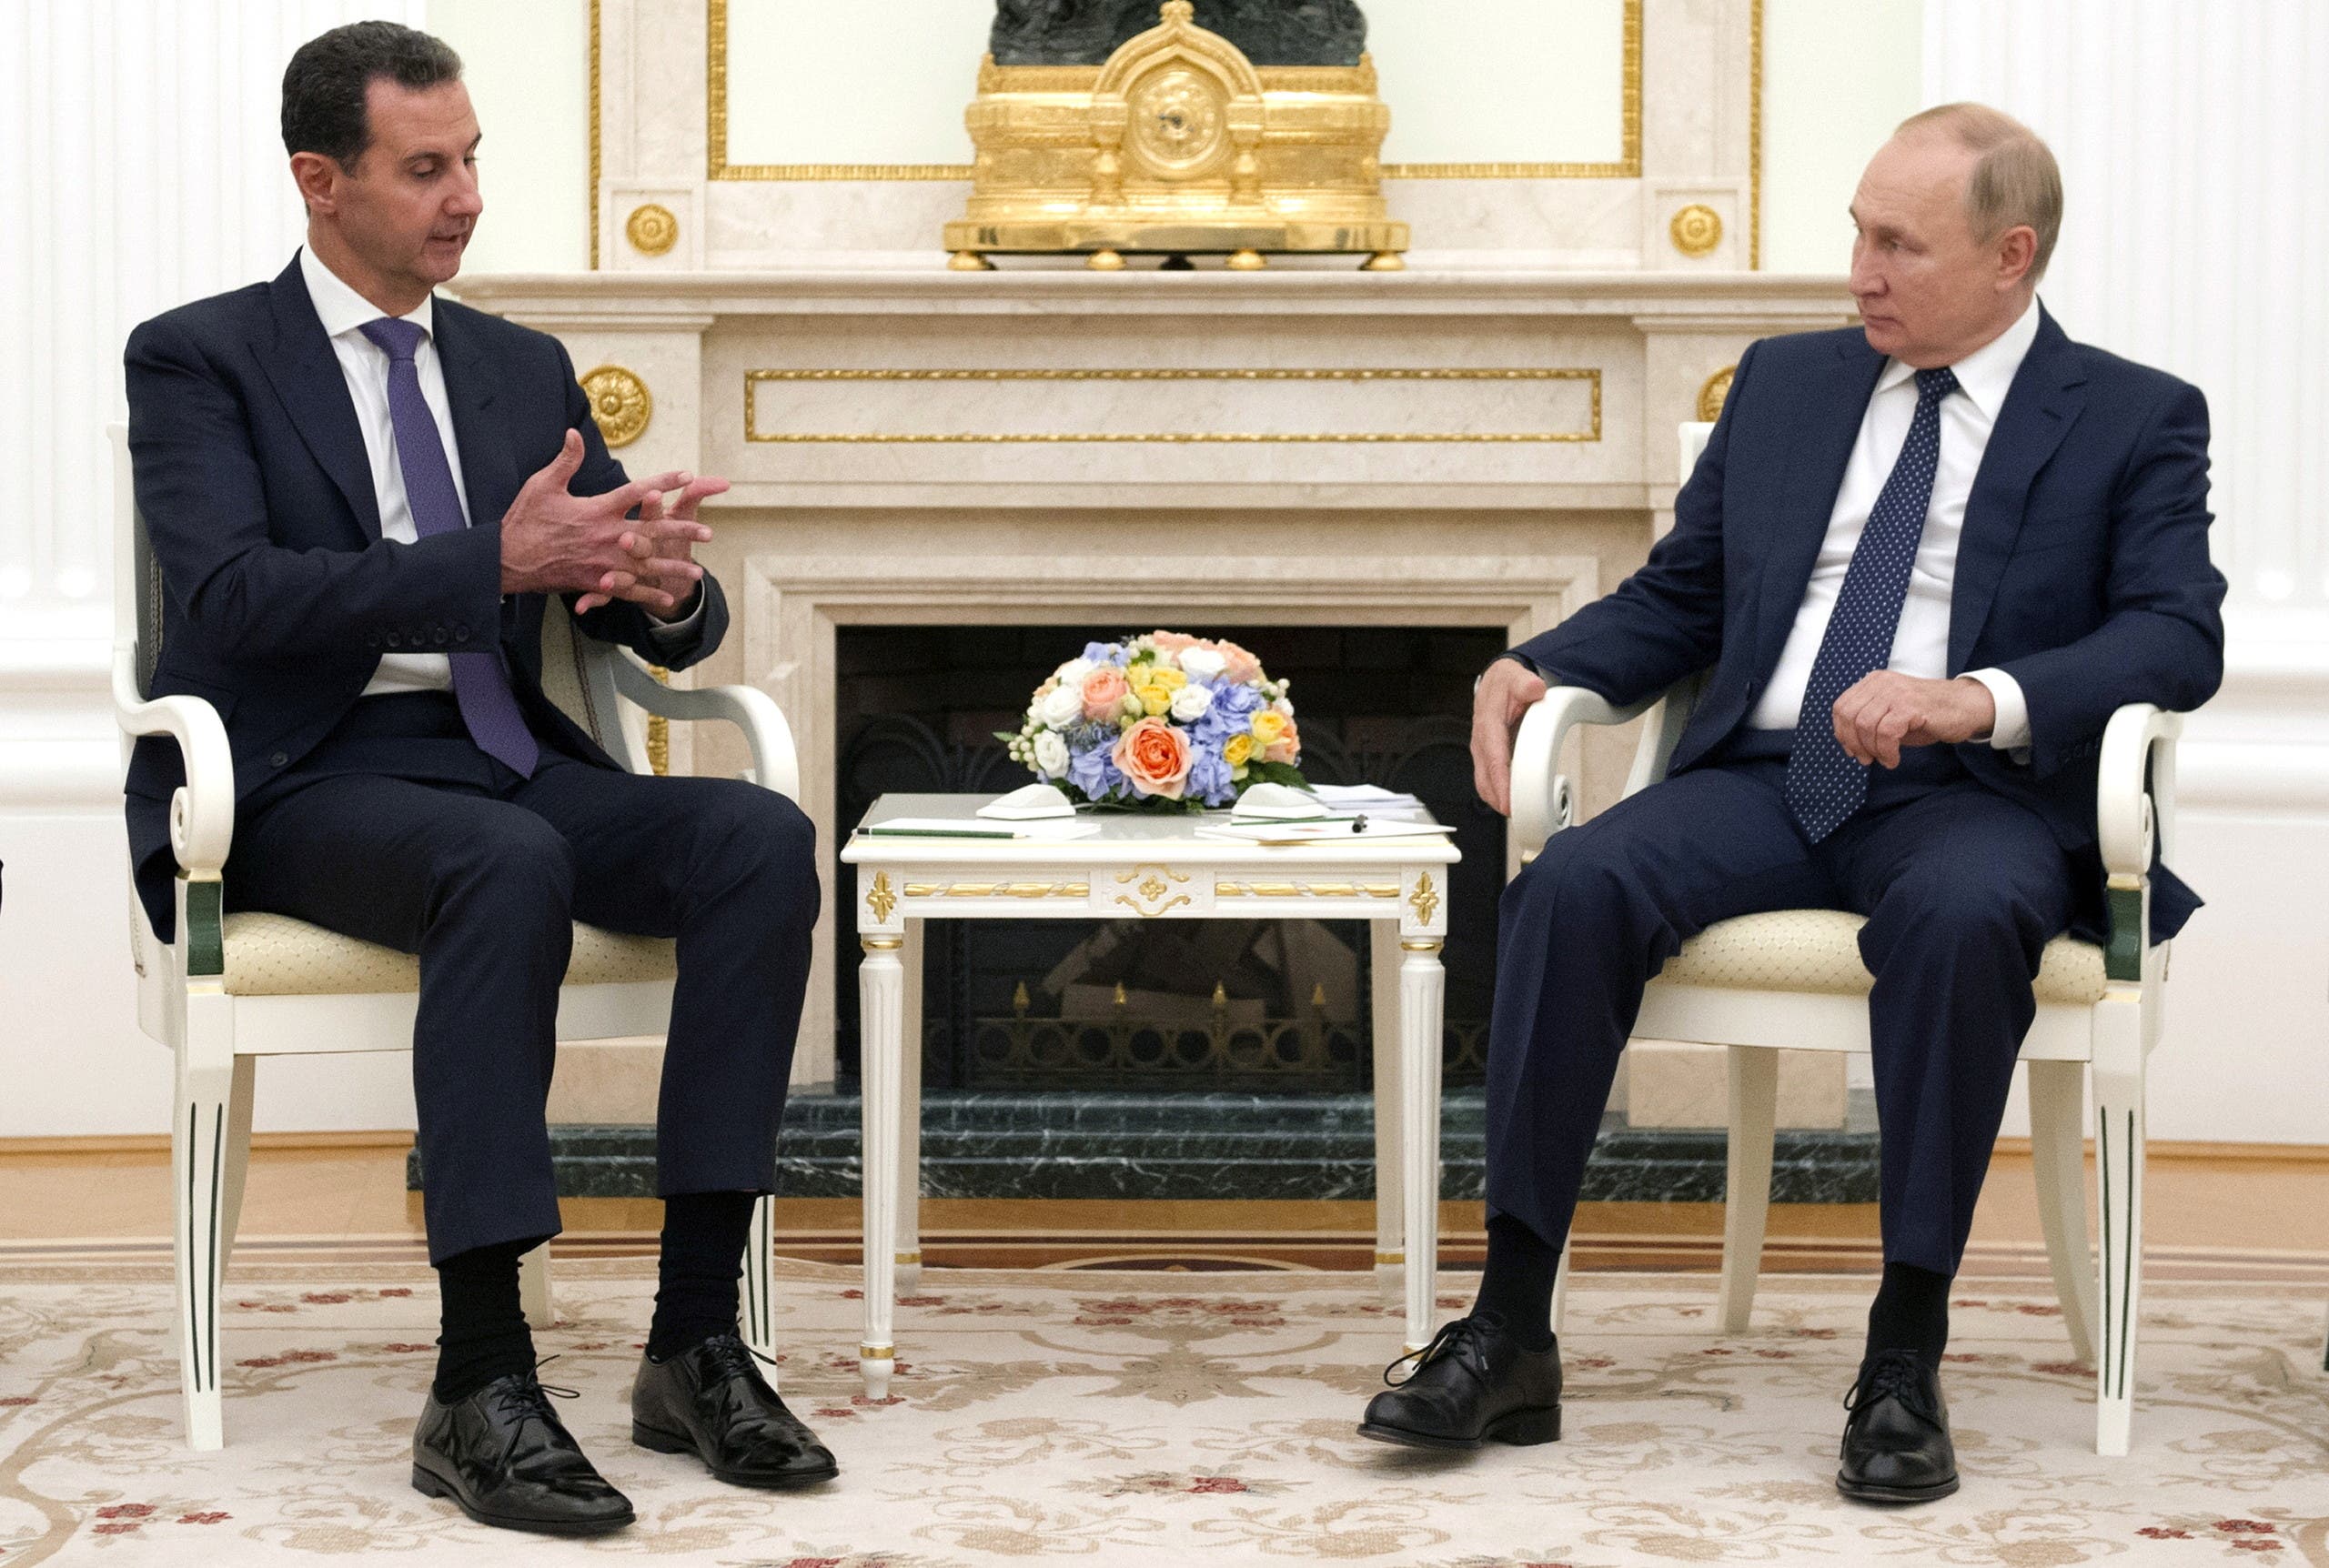 Russian President Vladimir Putin attends a meeting with Syrian President Bashar al-Assad at the Kremlin in Moscow, Russia, September 13, 2021. Picture taken September 13, 2021. (Reuters)